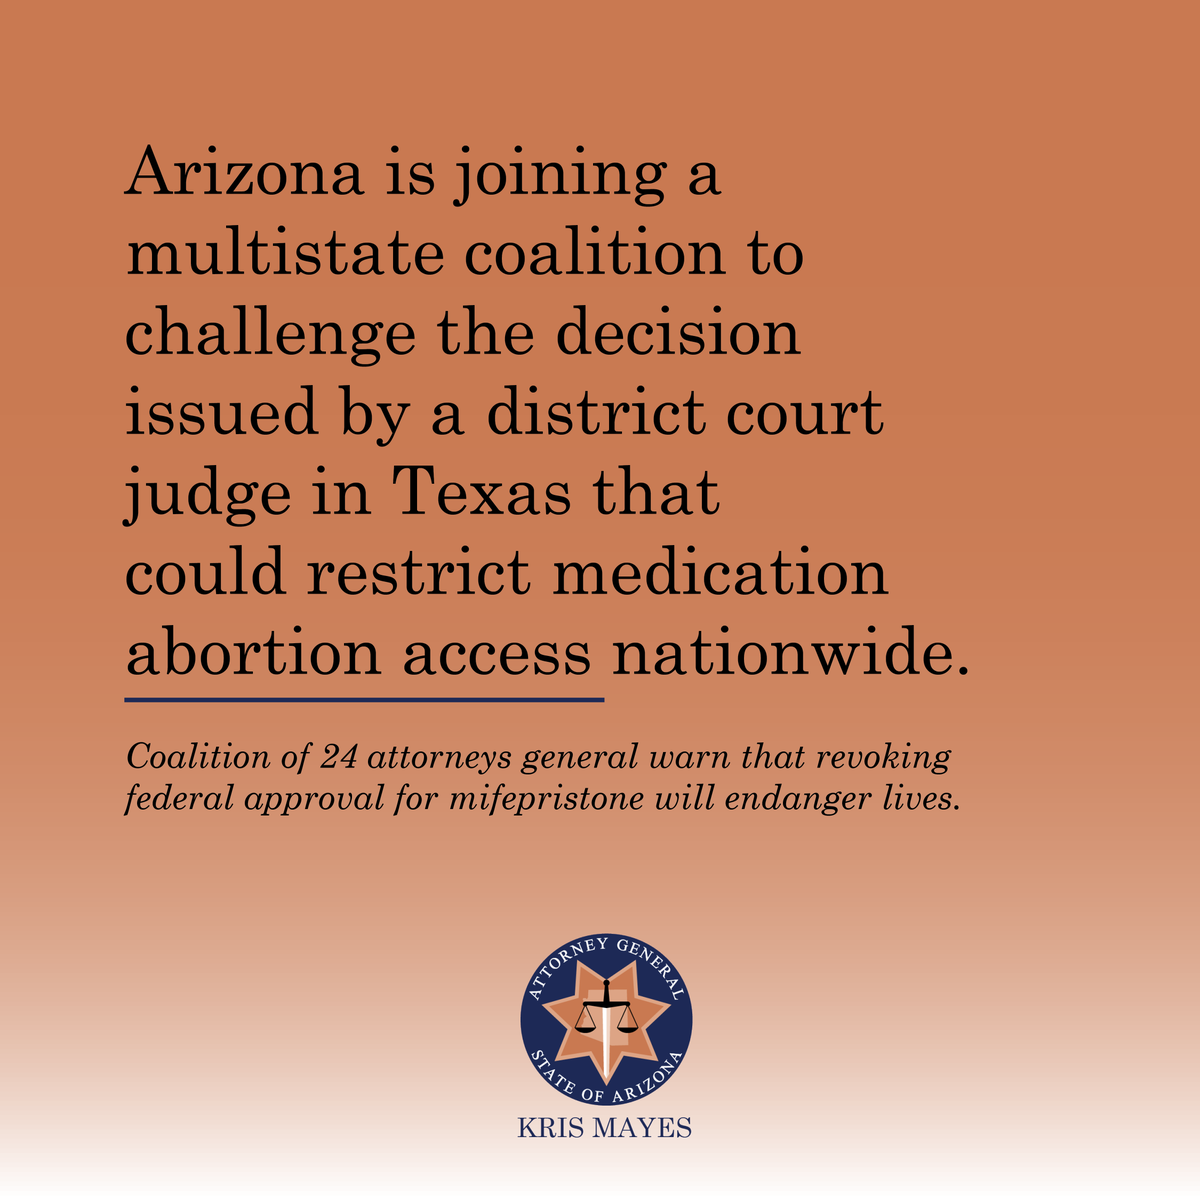 I am proud to join my fellow attorneys general in fighting for the rights of individuals to make their own personal medical decisions without interference from extremist judges and anti-abortion activists. More on the amicus brief: azag.gov/press-release/…